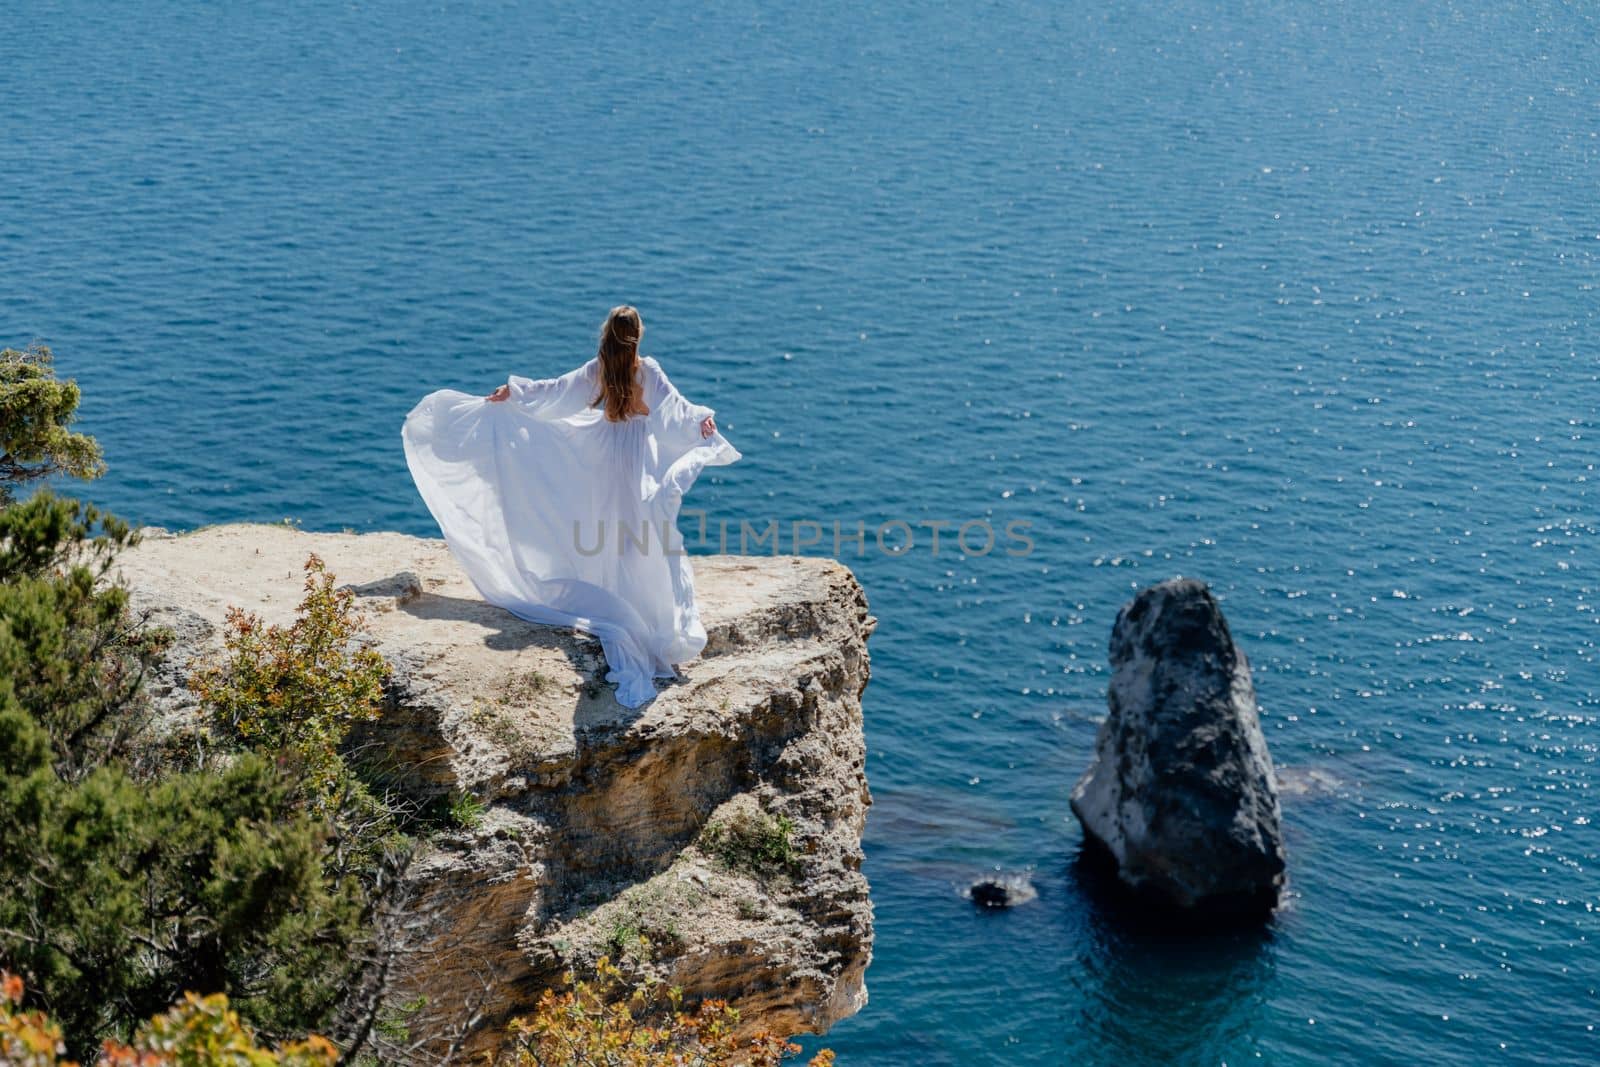 Woman in a white dress on the sea. Side view Young beautiful sensual woman in white long dress posing on a rock high above the sea at sunset. Girl in nature against the blue sky.